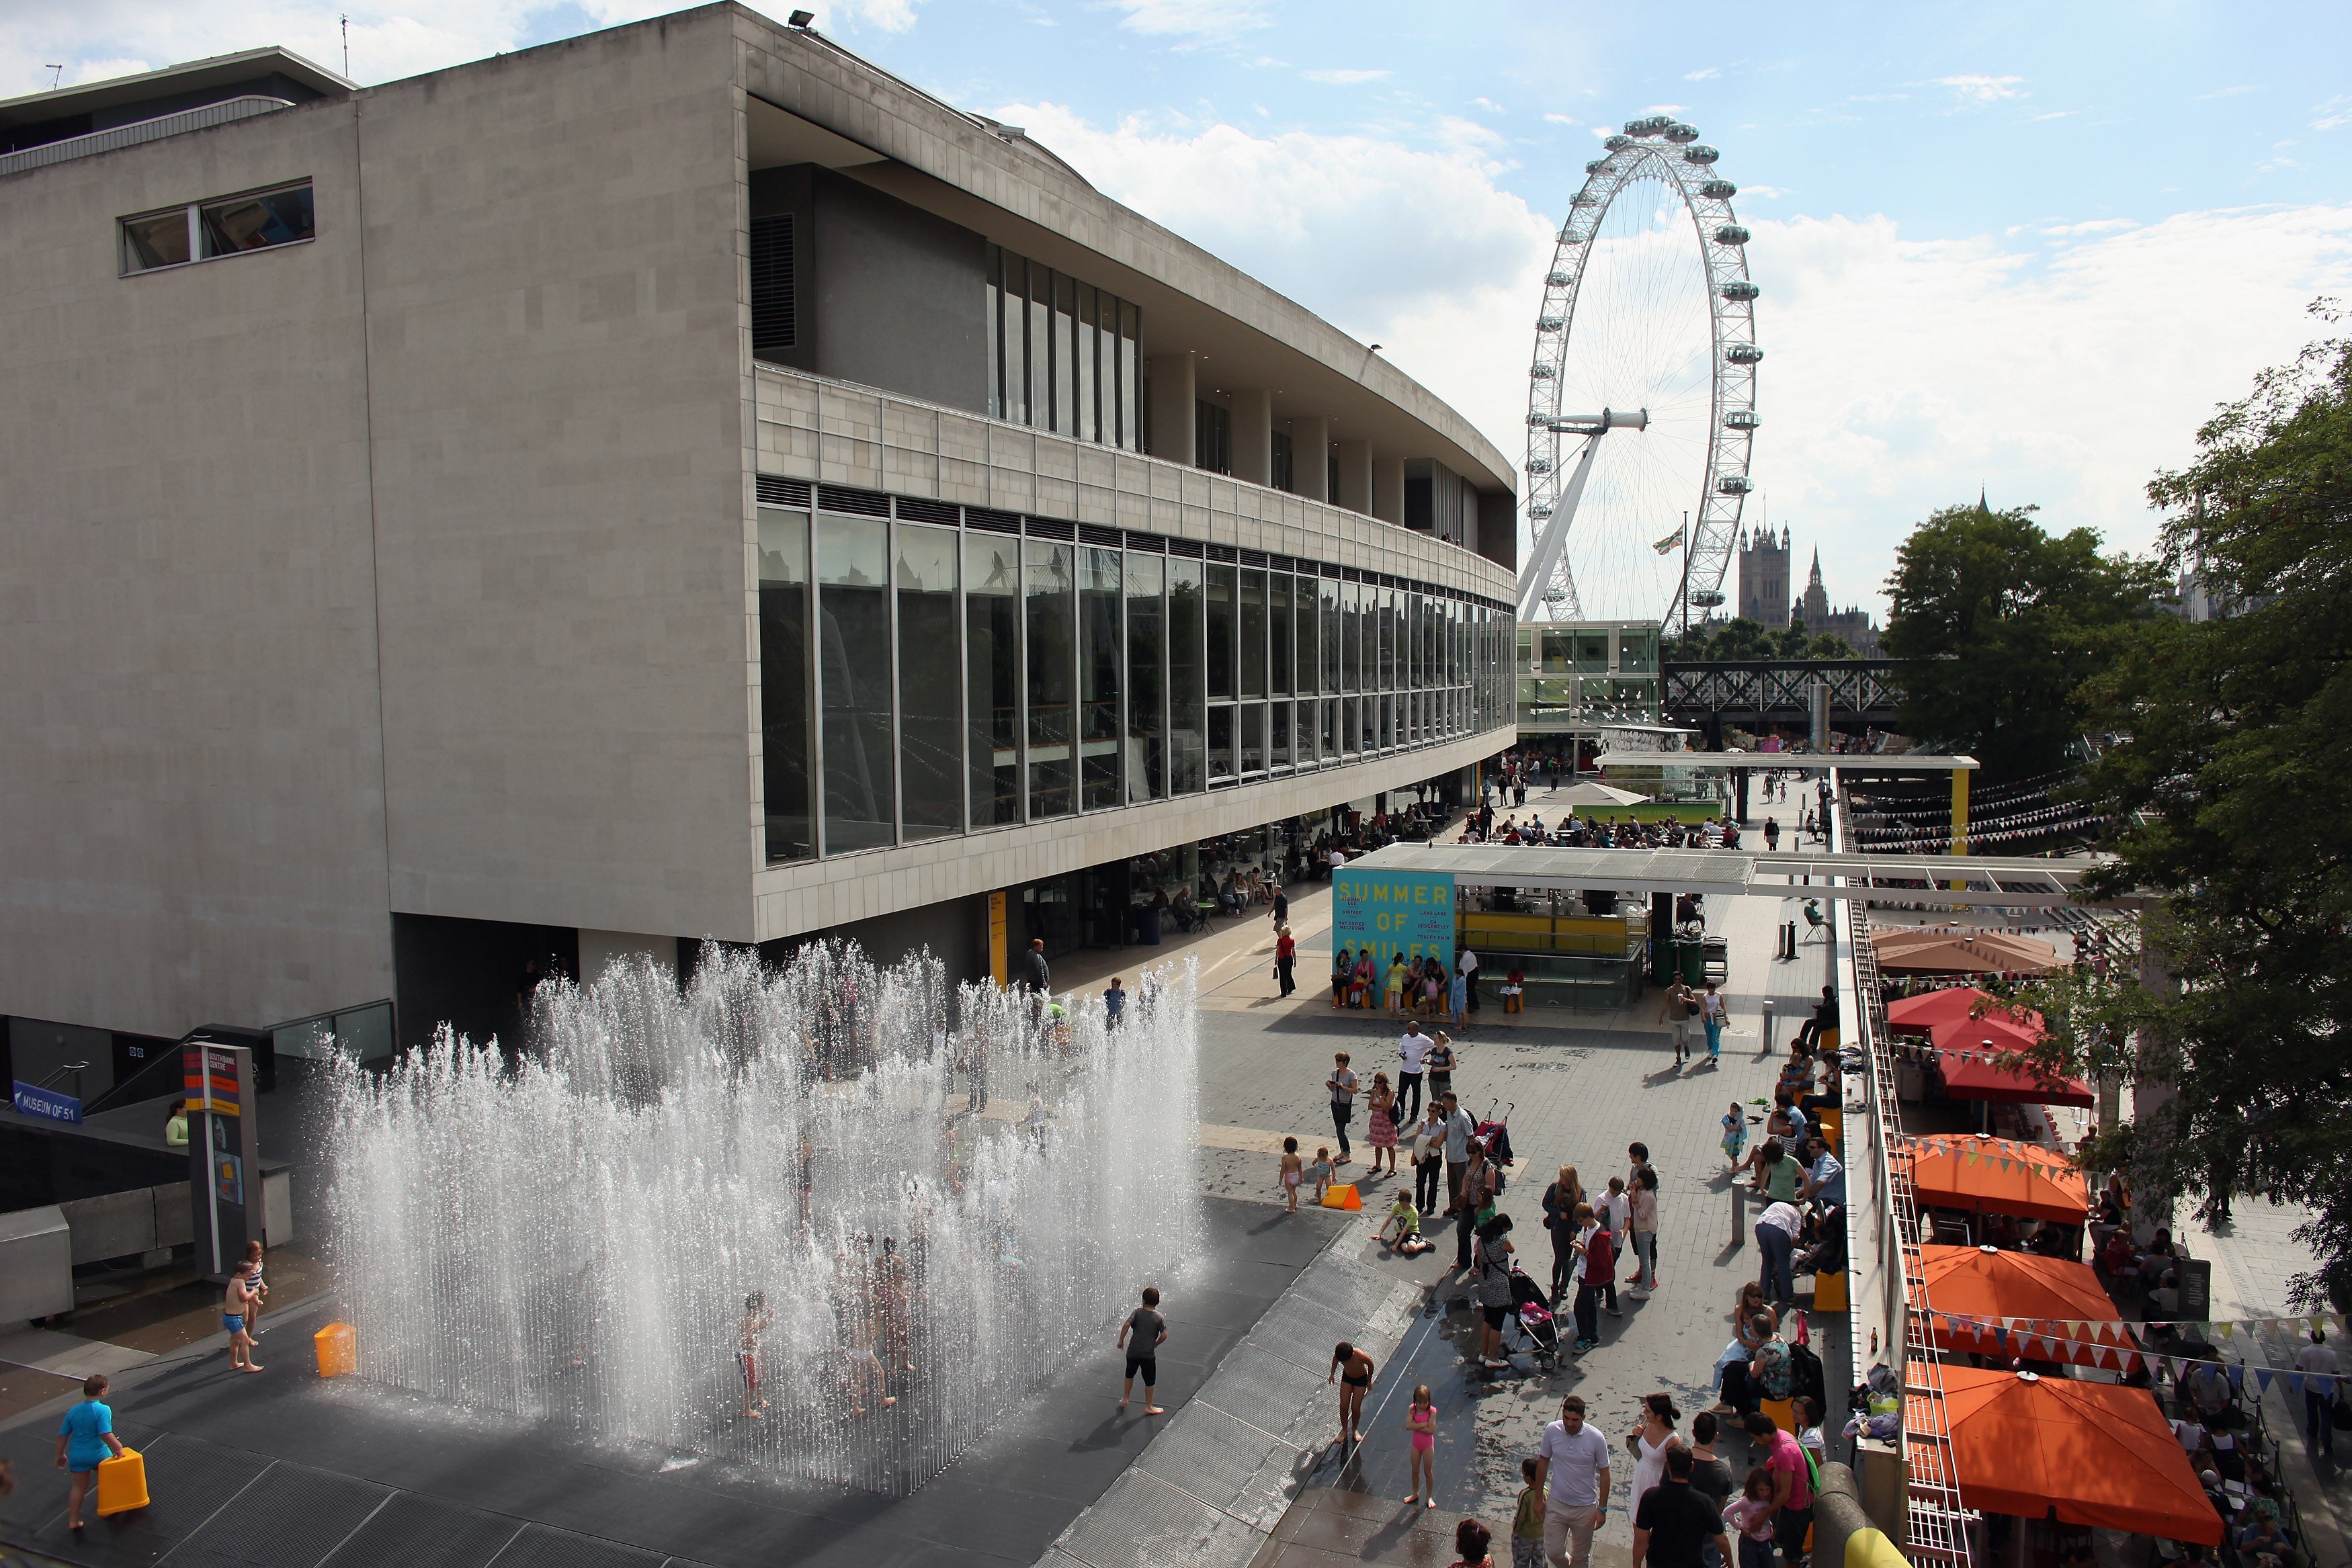 The boss of the Southbank Centre said this week that £50m would be needed for building repairs